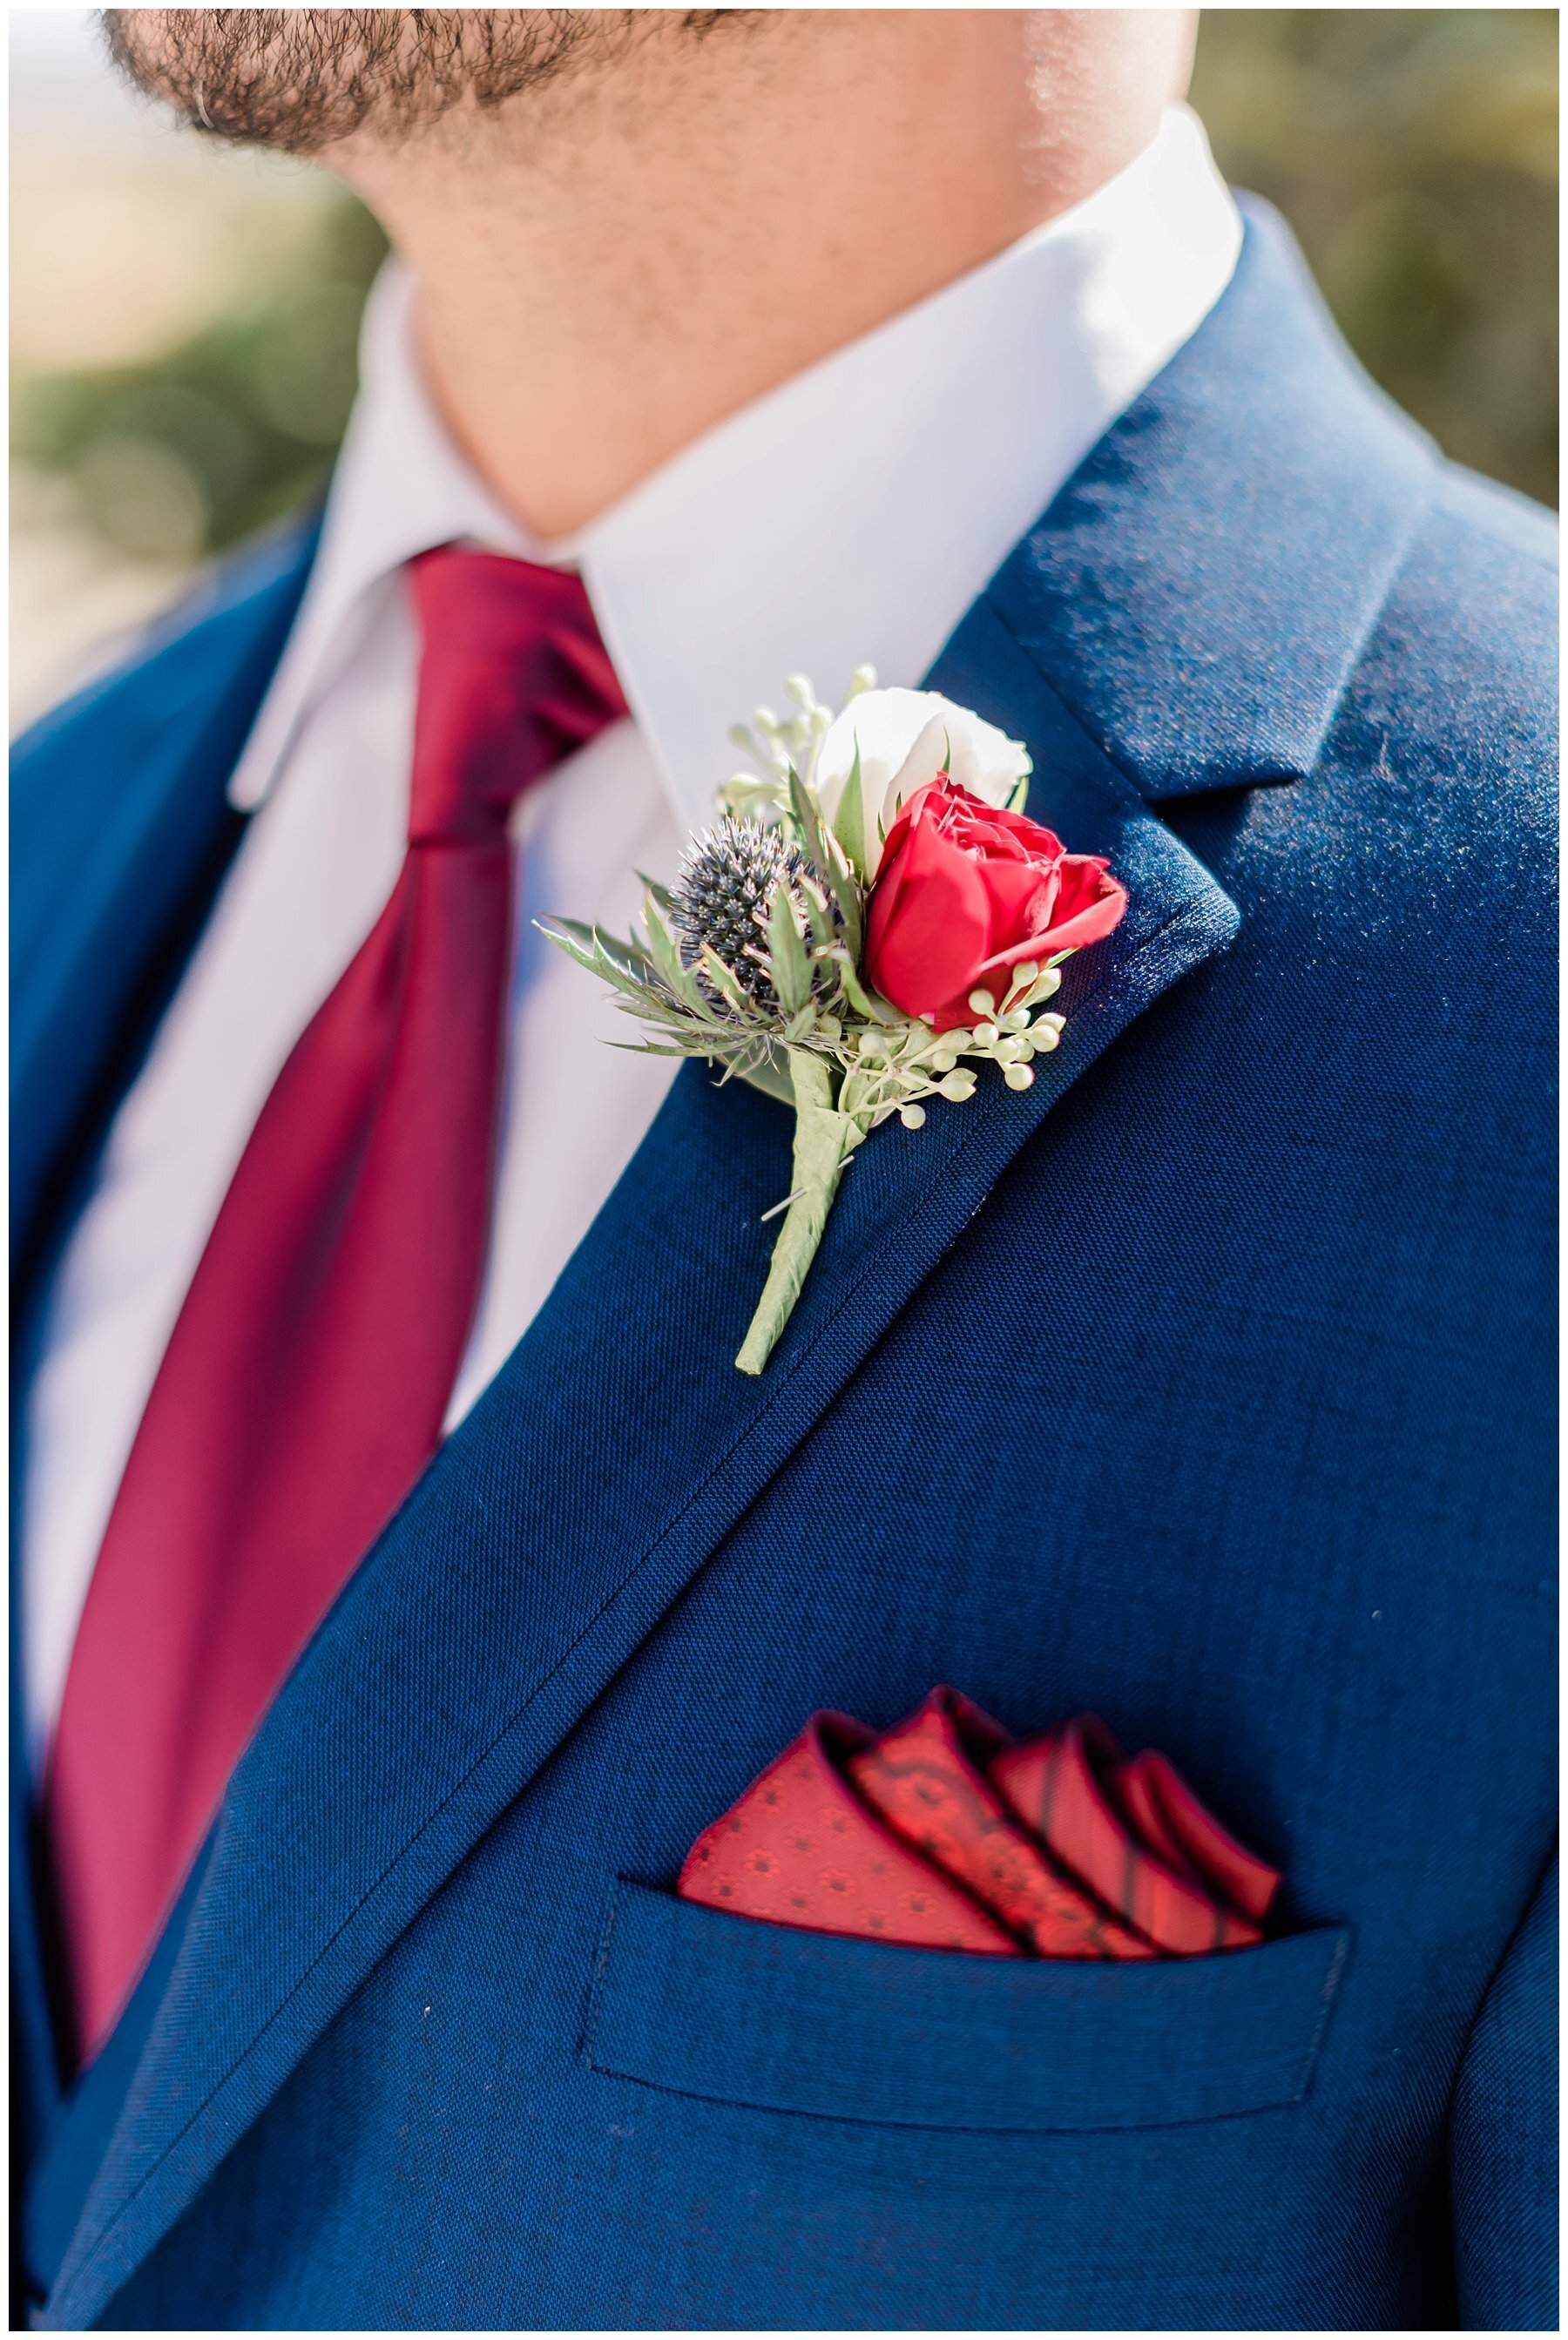  groom wearing pocket square and boutonnière  